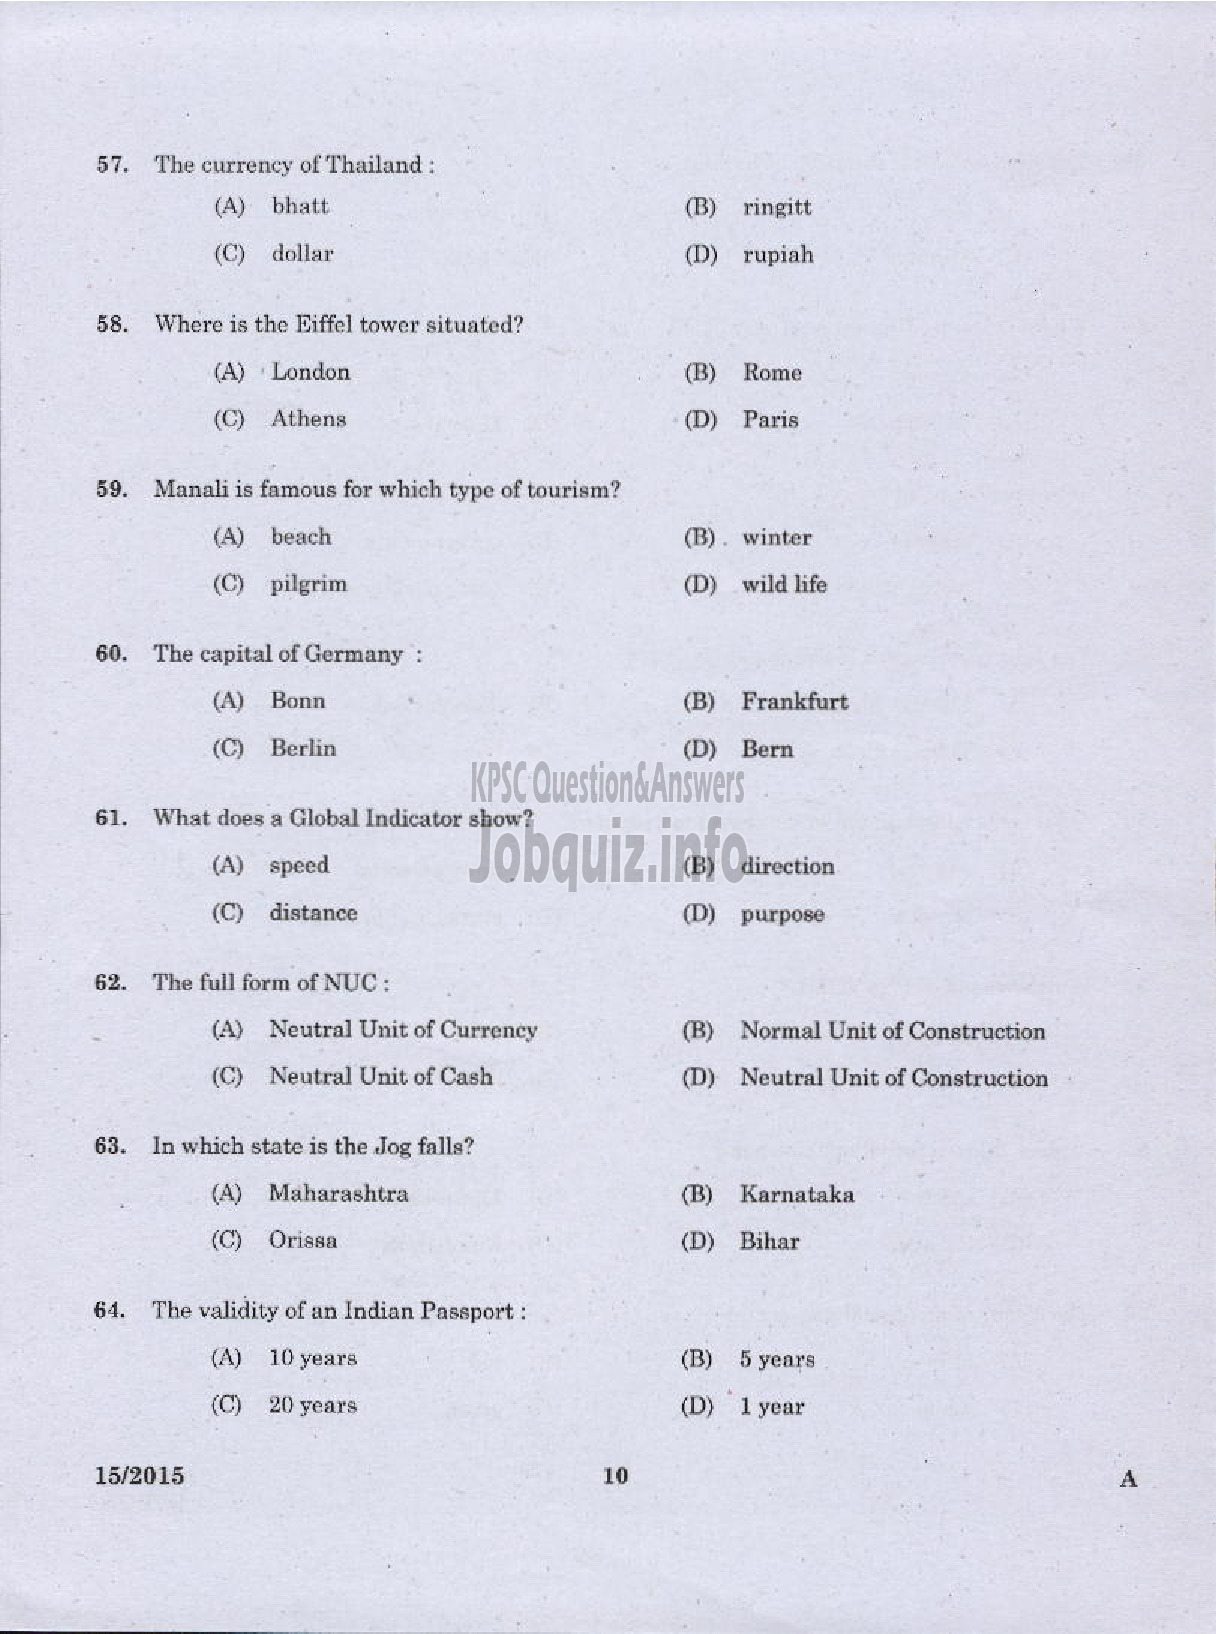 Kerala PSC Question Paper - LABORATORY TECHNICAL ASSISTANT TRAVEL AND TOURISM VHSE-8